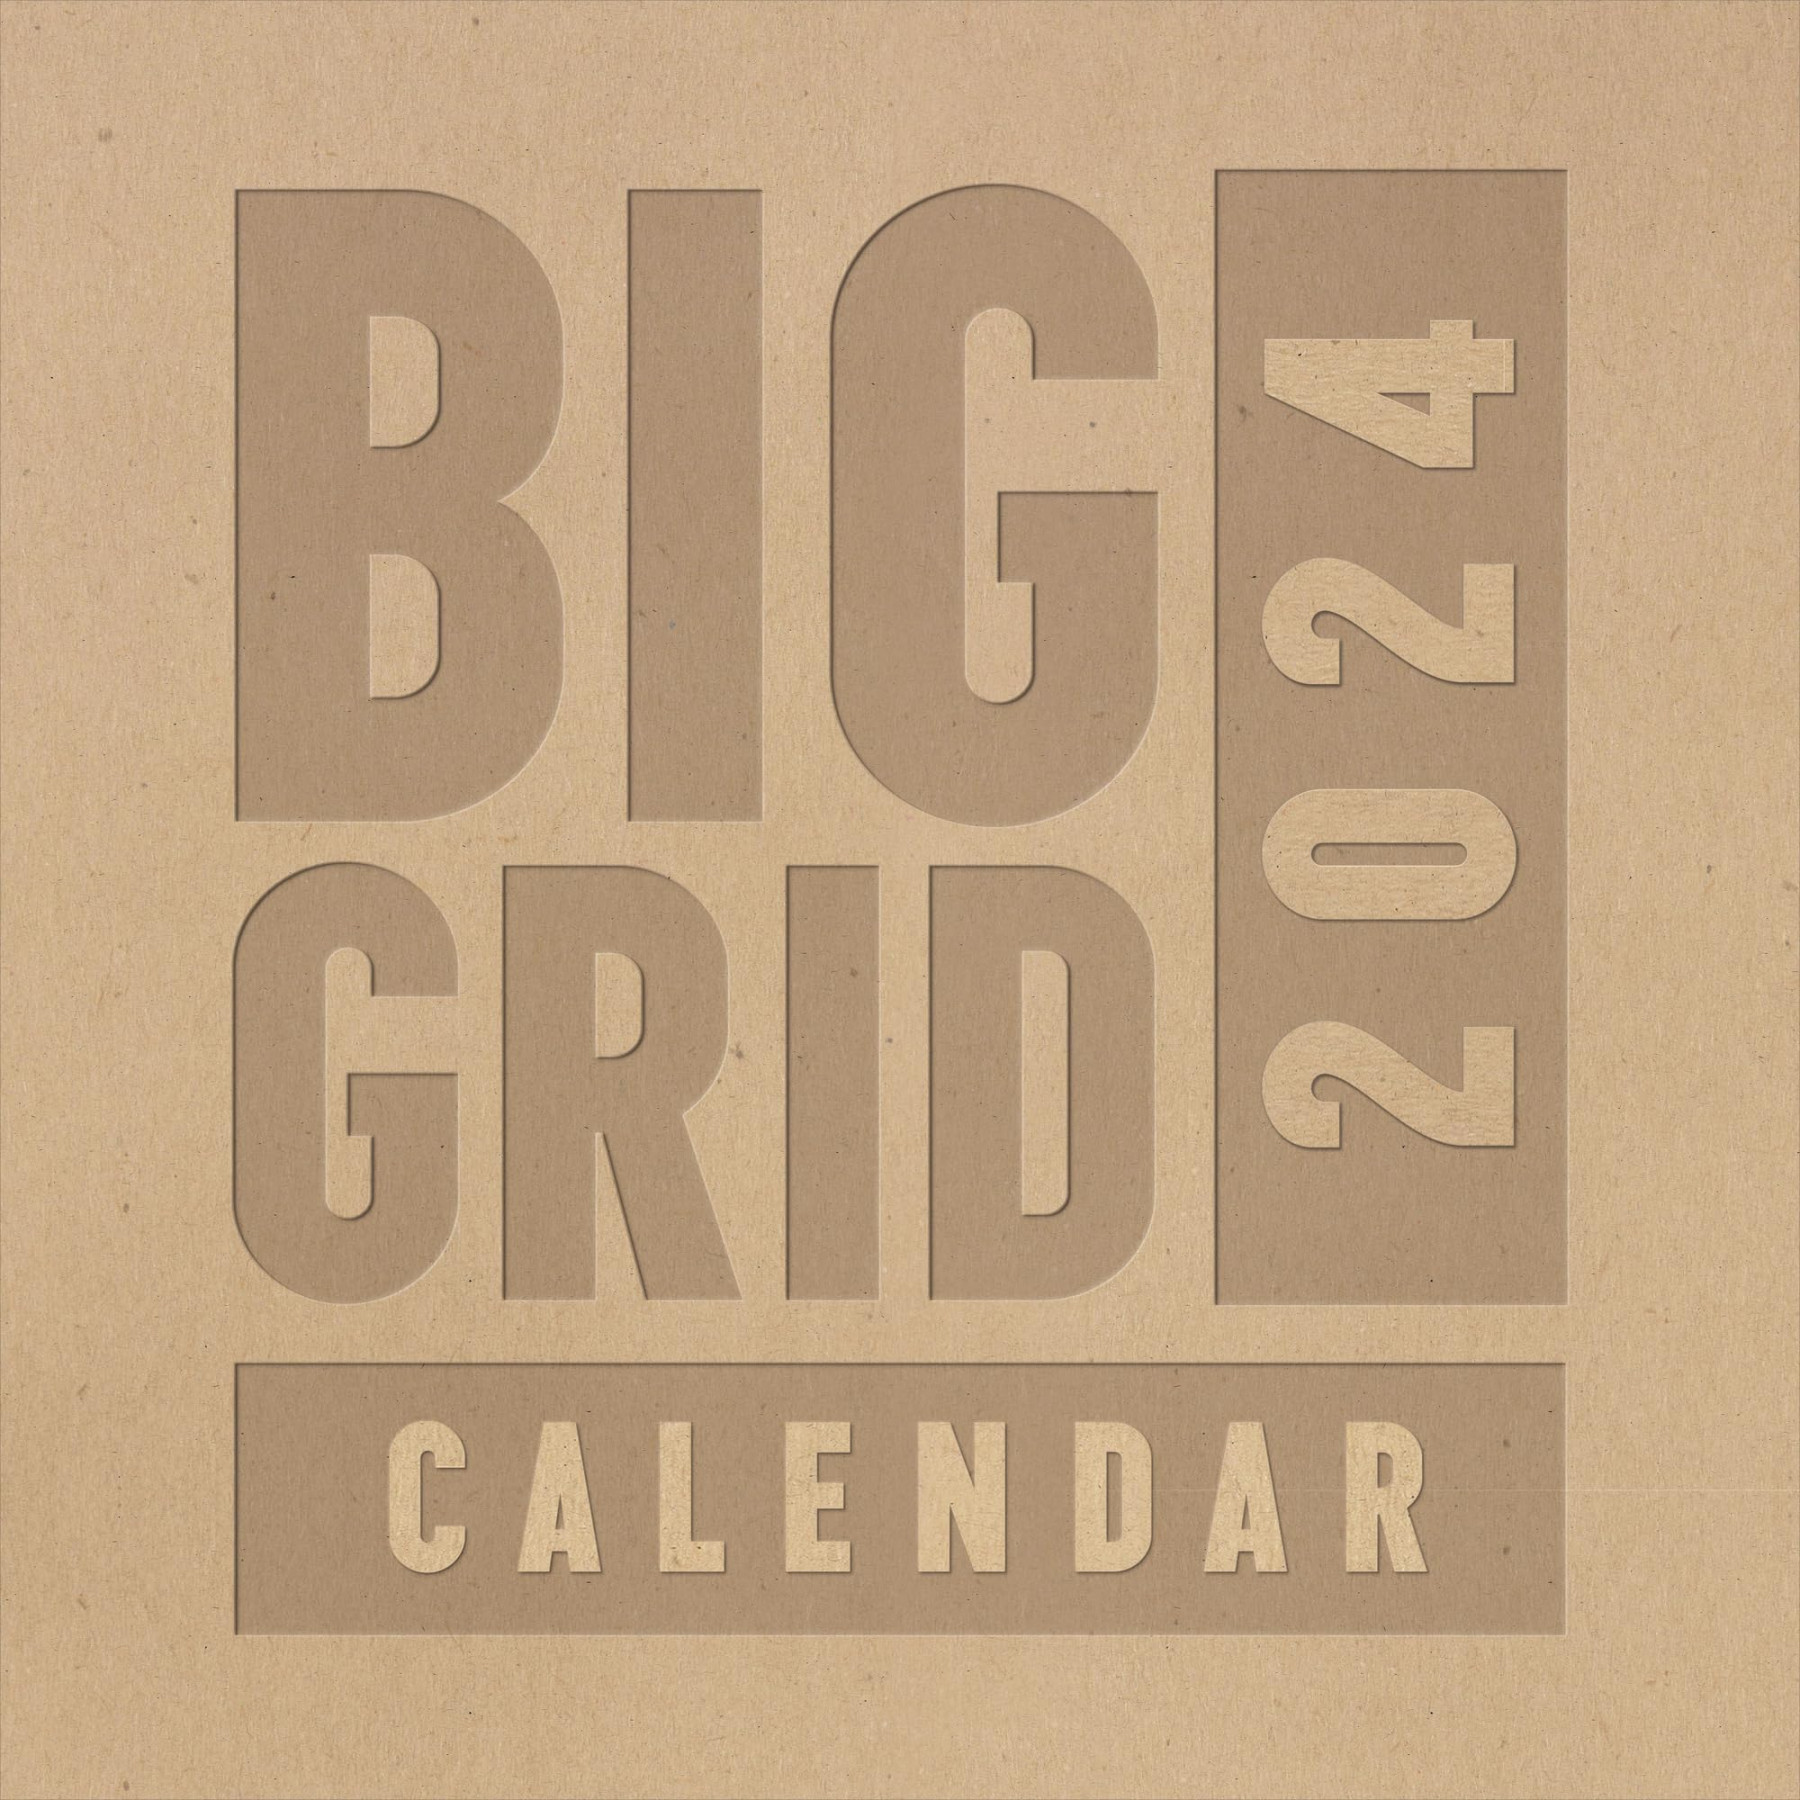 TF PUBLISHING  Big Grid - Kraft Wall Calendar  Large Grids for  Appointments and Scheduling  VeSee more TF PUBLISHING  Big Grid -  Kraft Wall